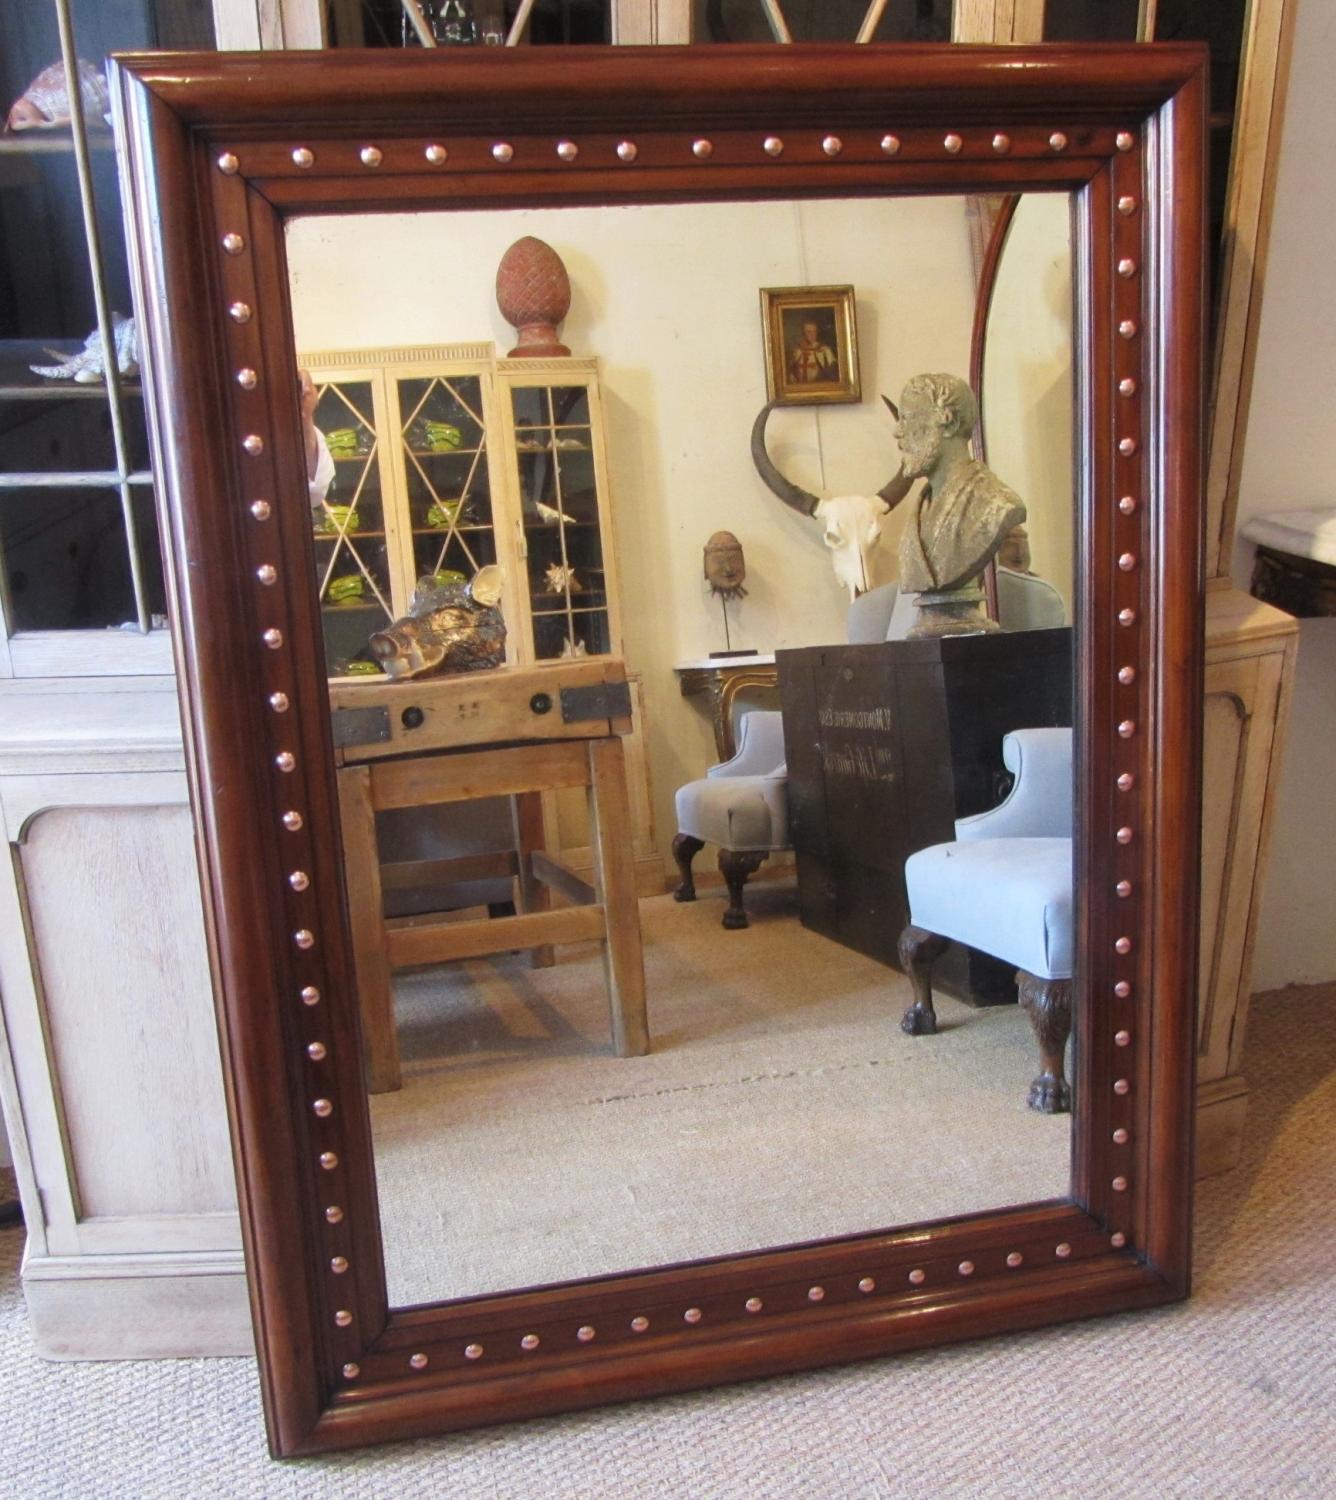 A Large mirror